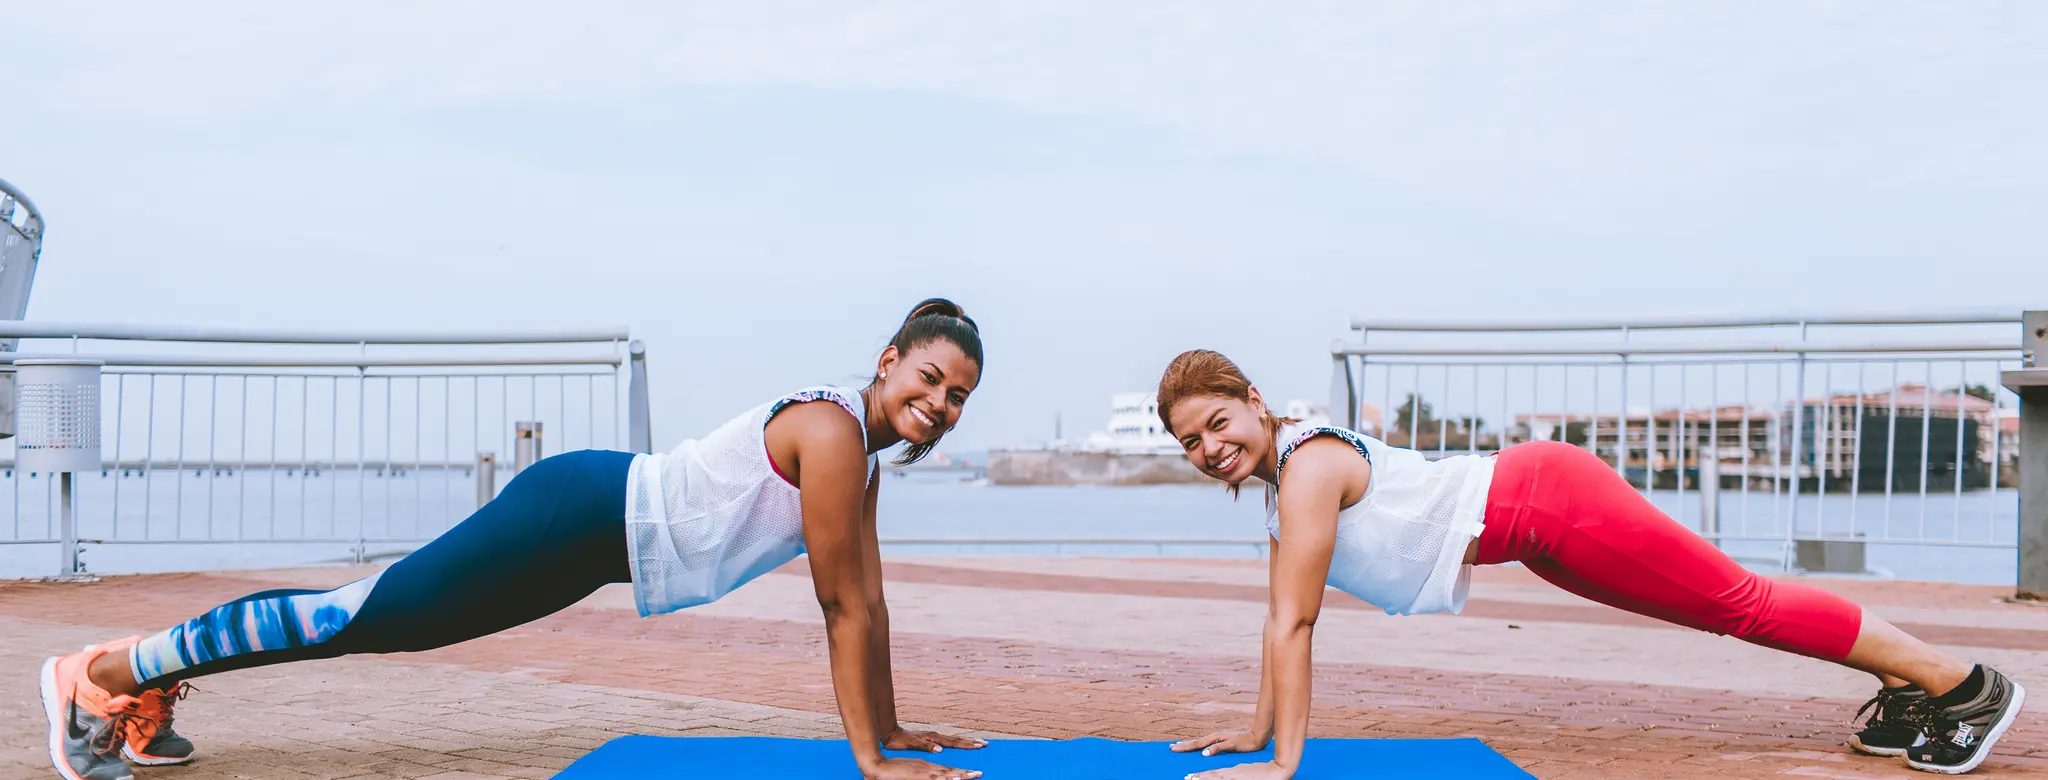 two women working out together outside